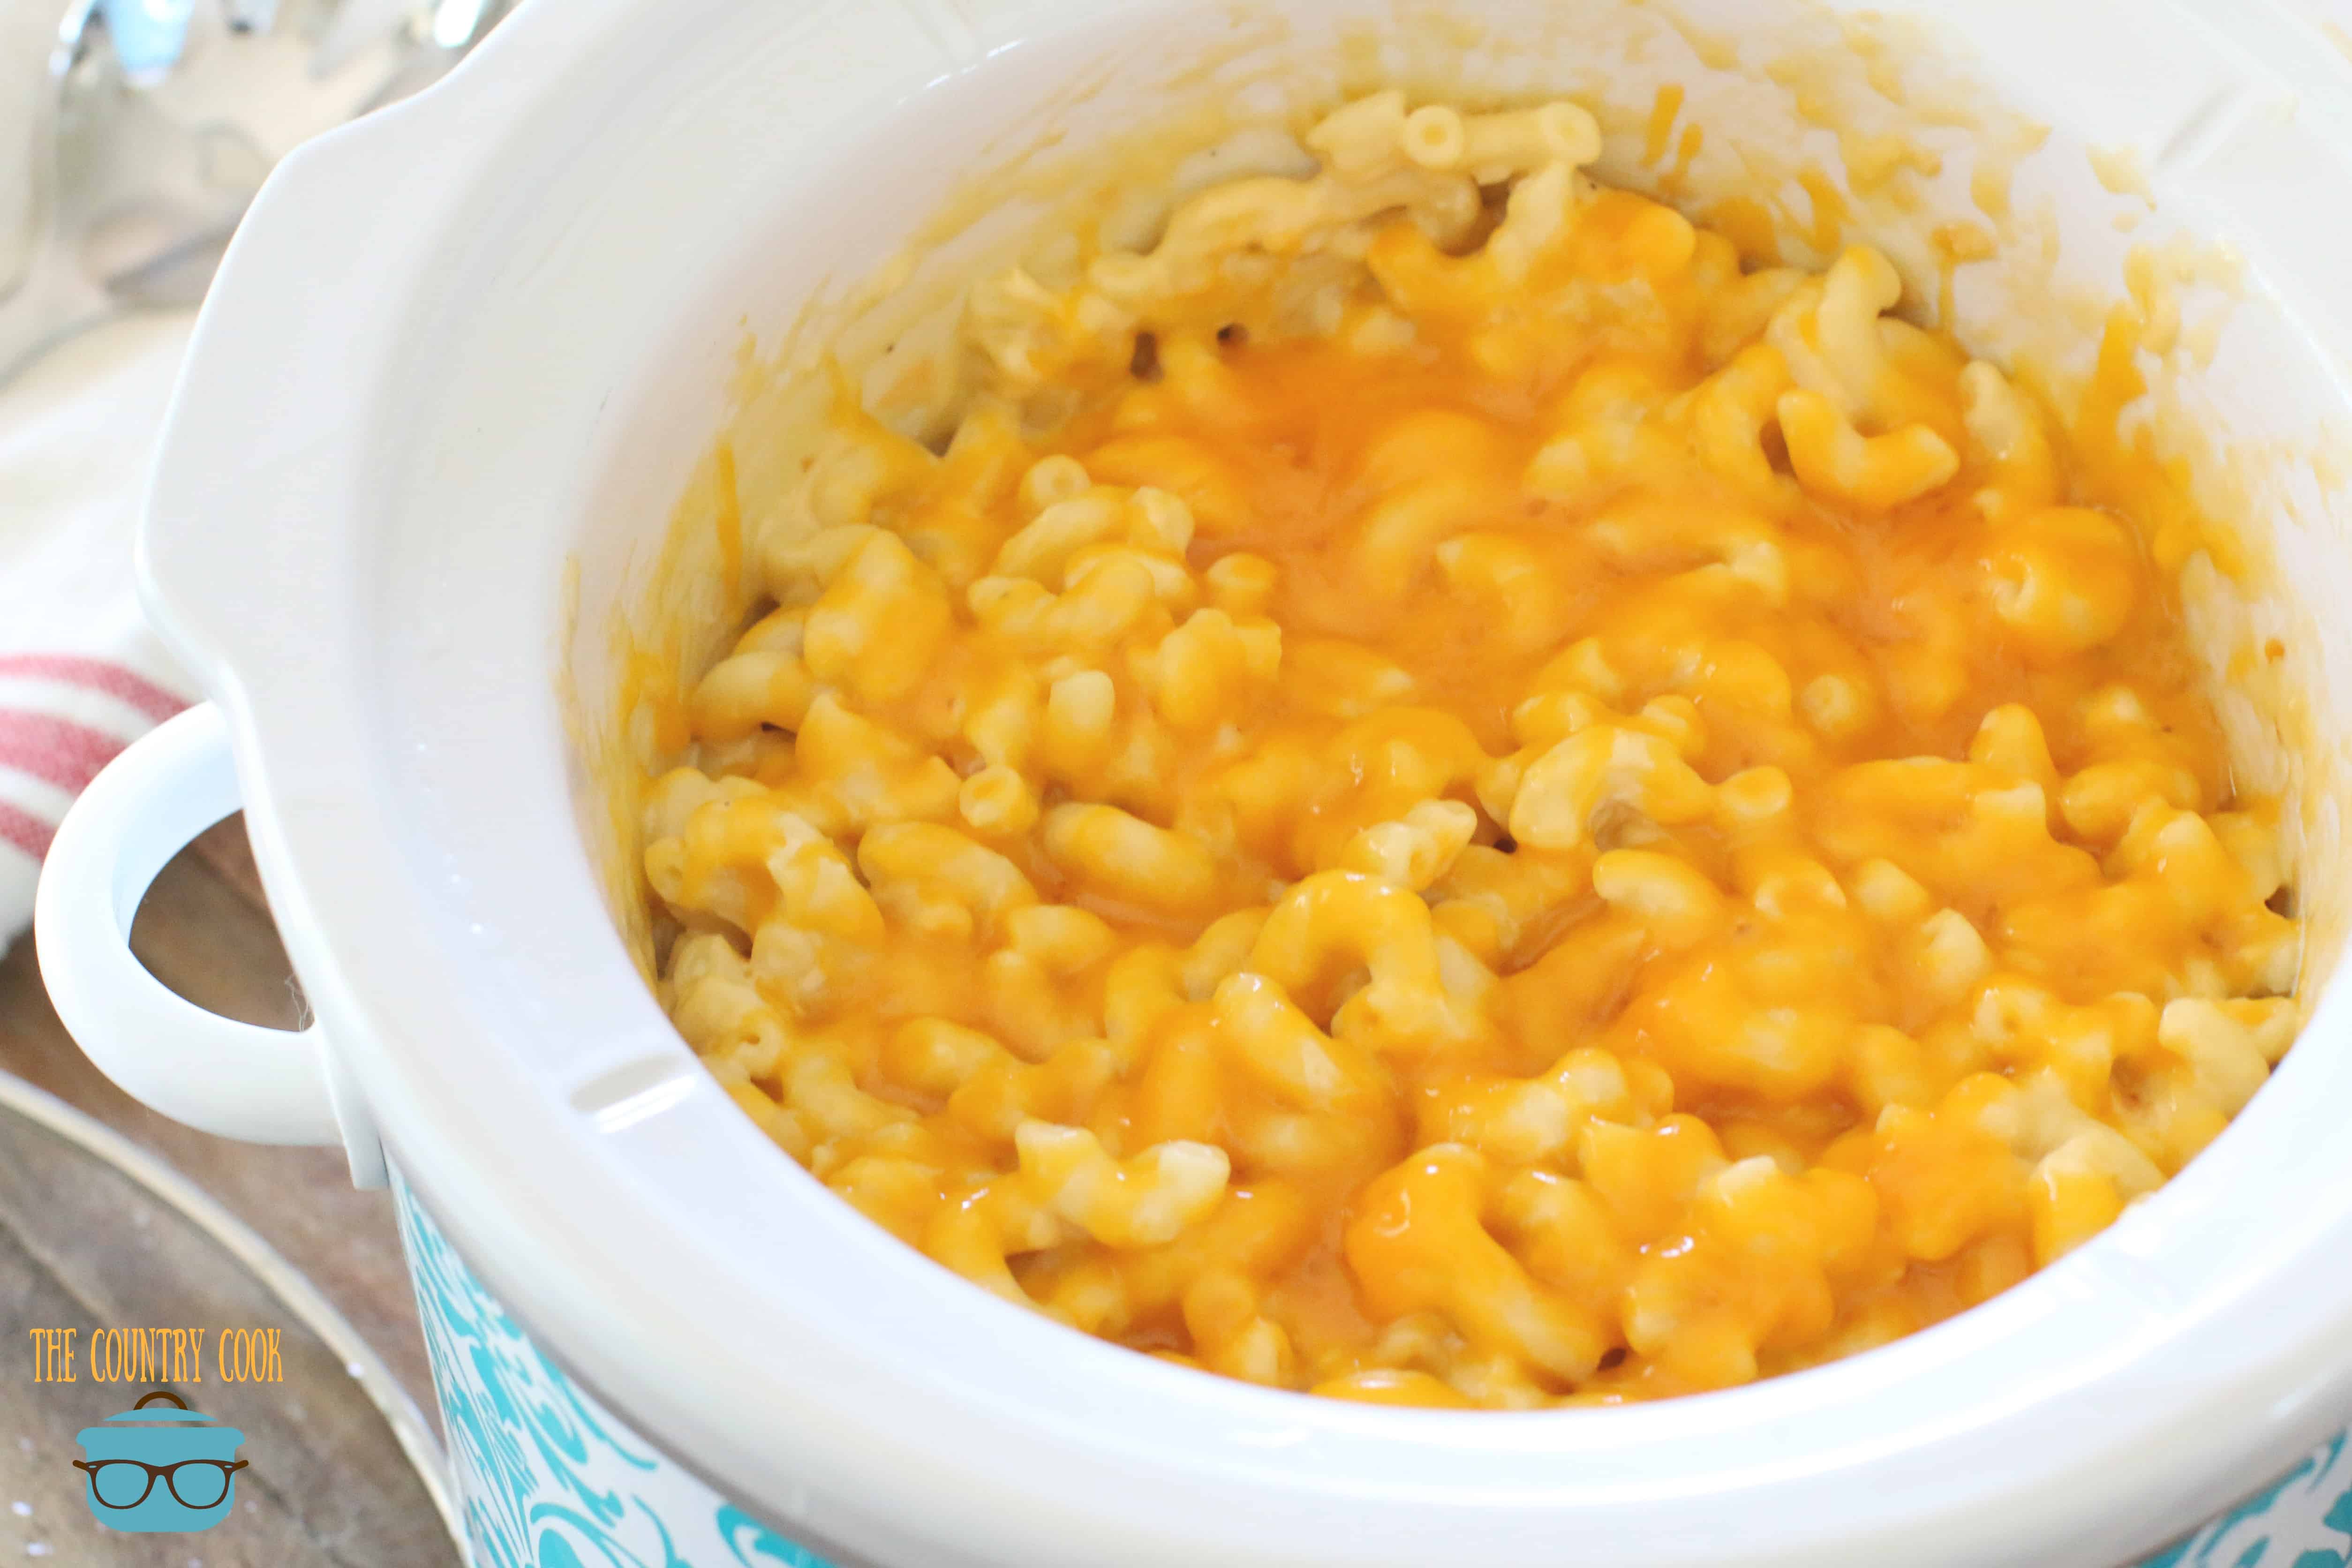 melted cheese on macaroni and cheese shown in a round slow cooker.